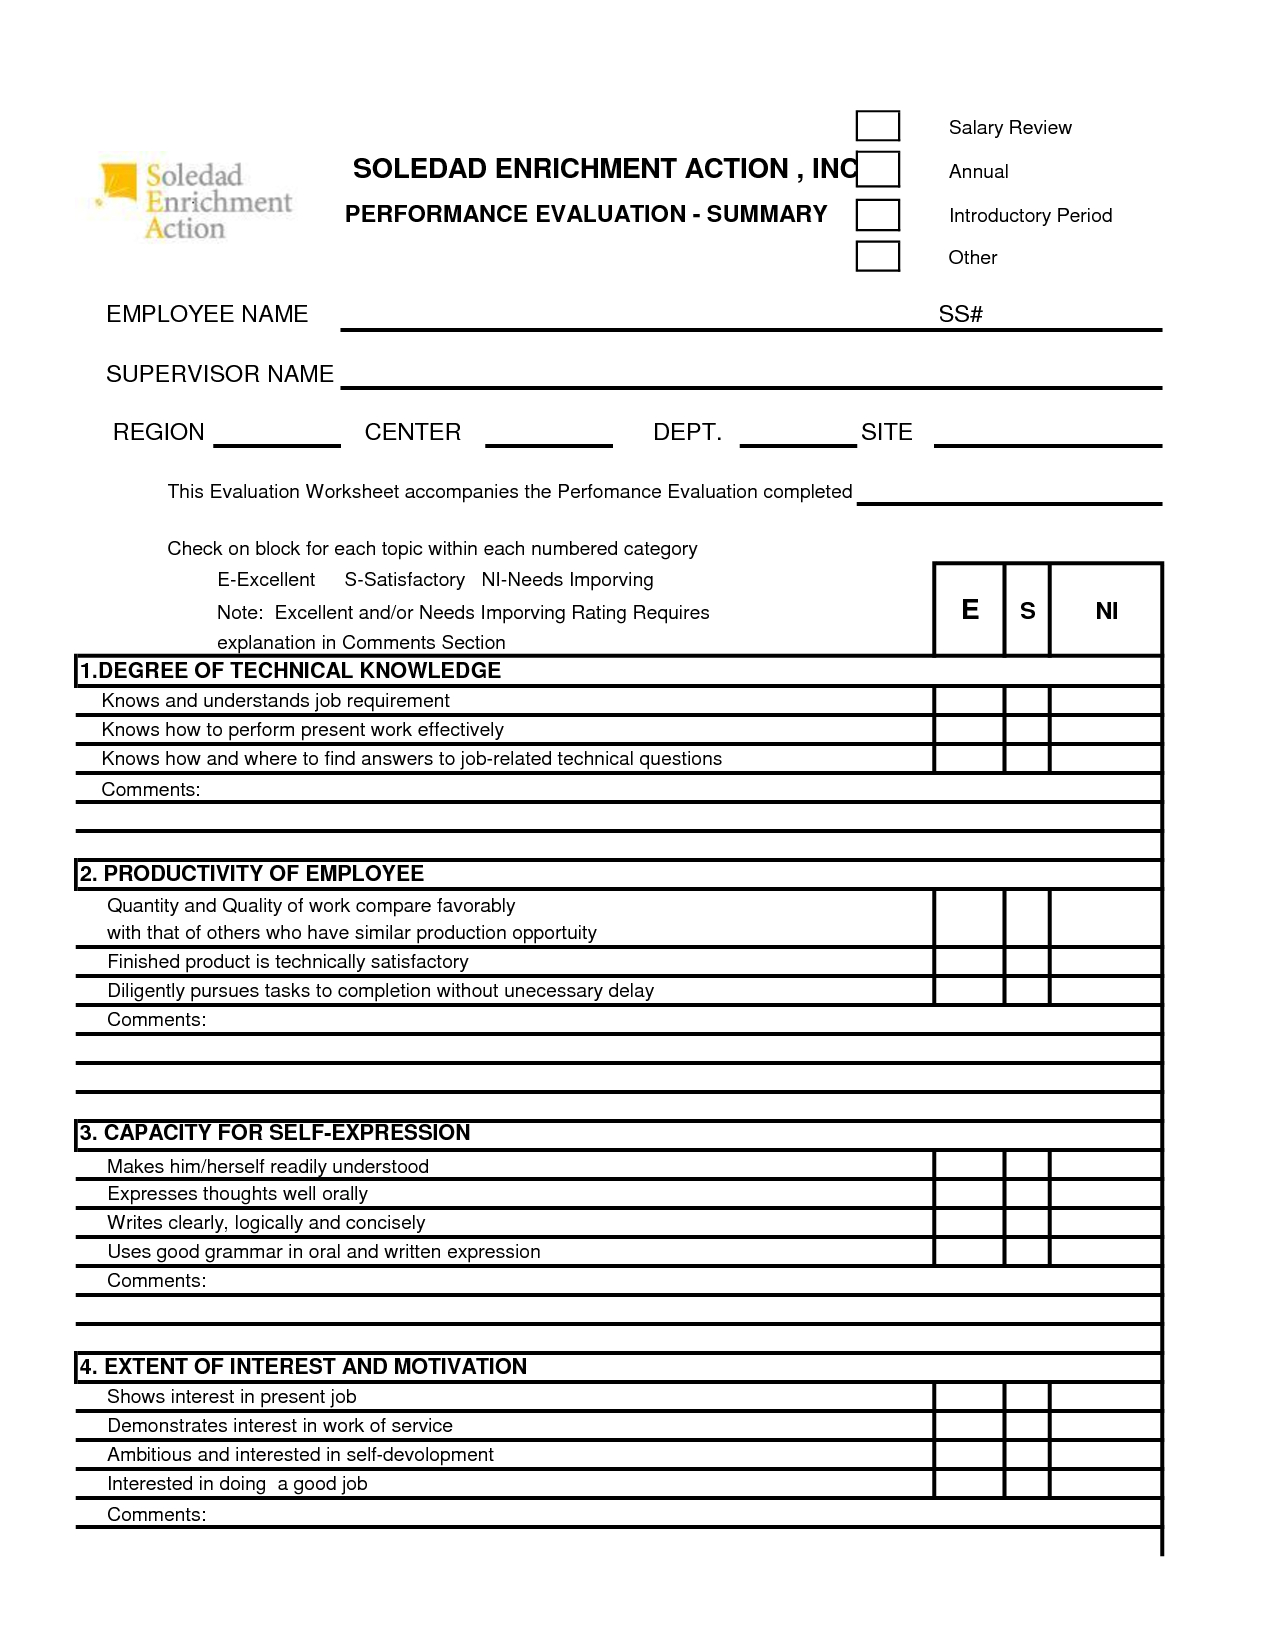 Free 360 Performance Appraisal Form - Google Search | The Career - Free Employee Self Evaluation Forms Printable